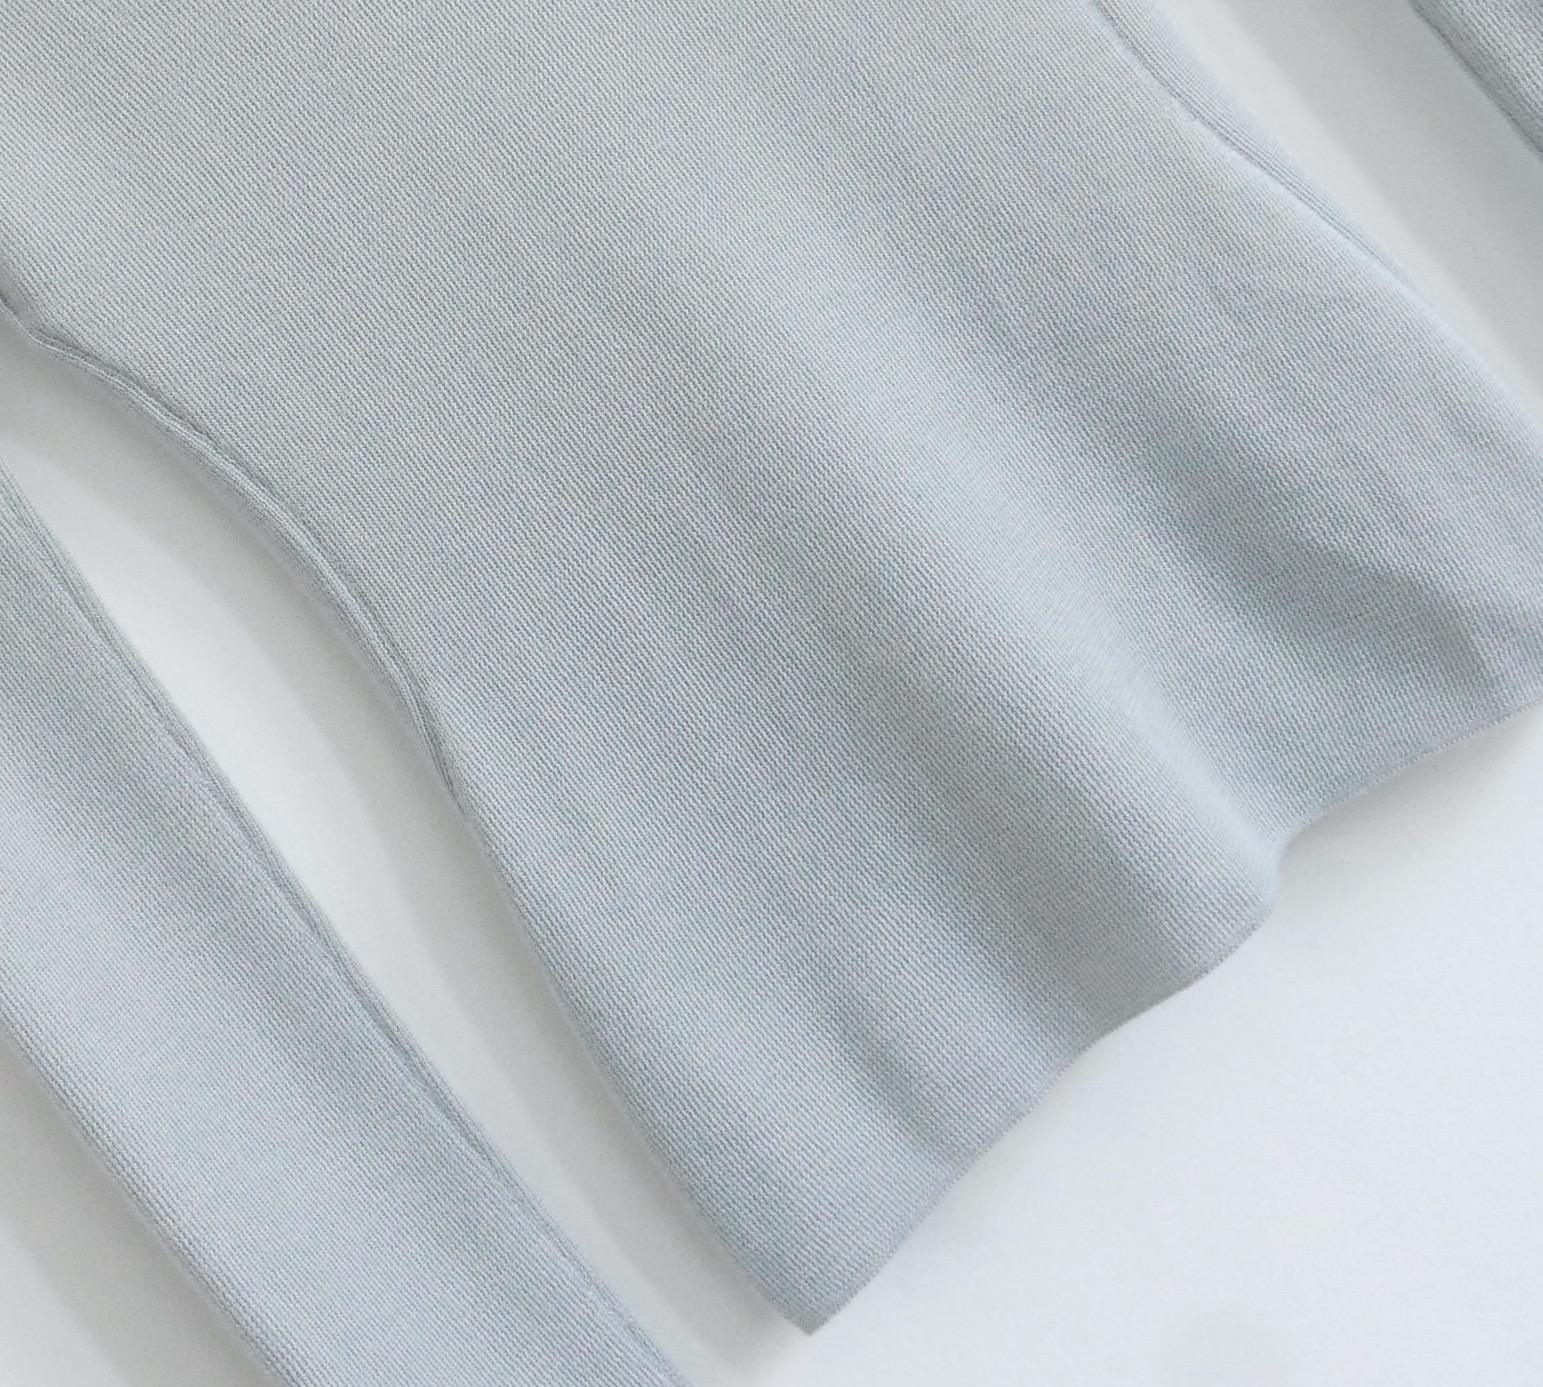 Dior x Raf Simons Pre-Fall 2014 Duck Egg Blue Cashmere/Silk High Neck Sweater  In New Condition For Sale In London, GB